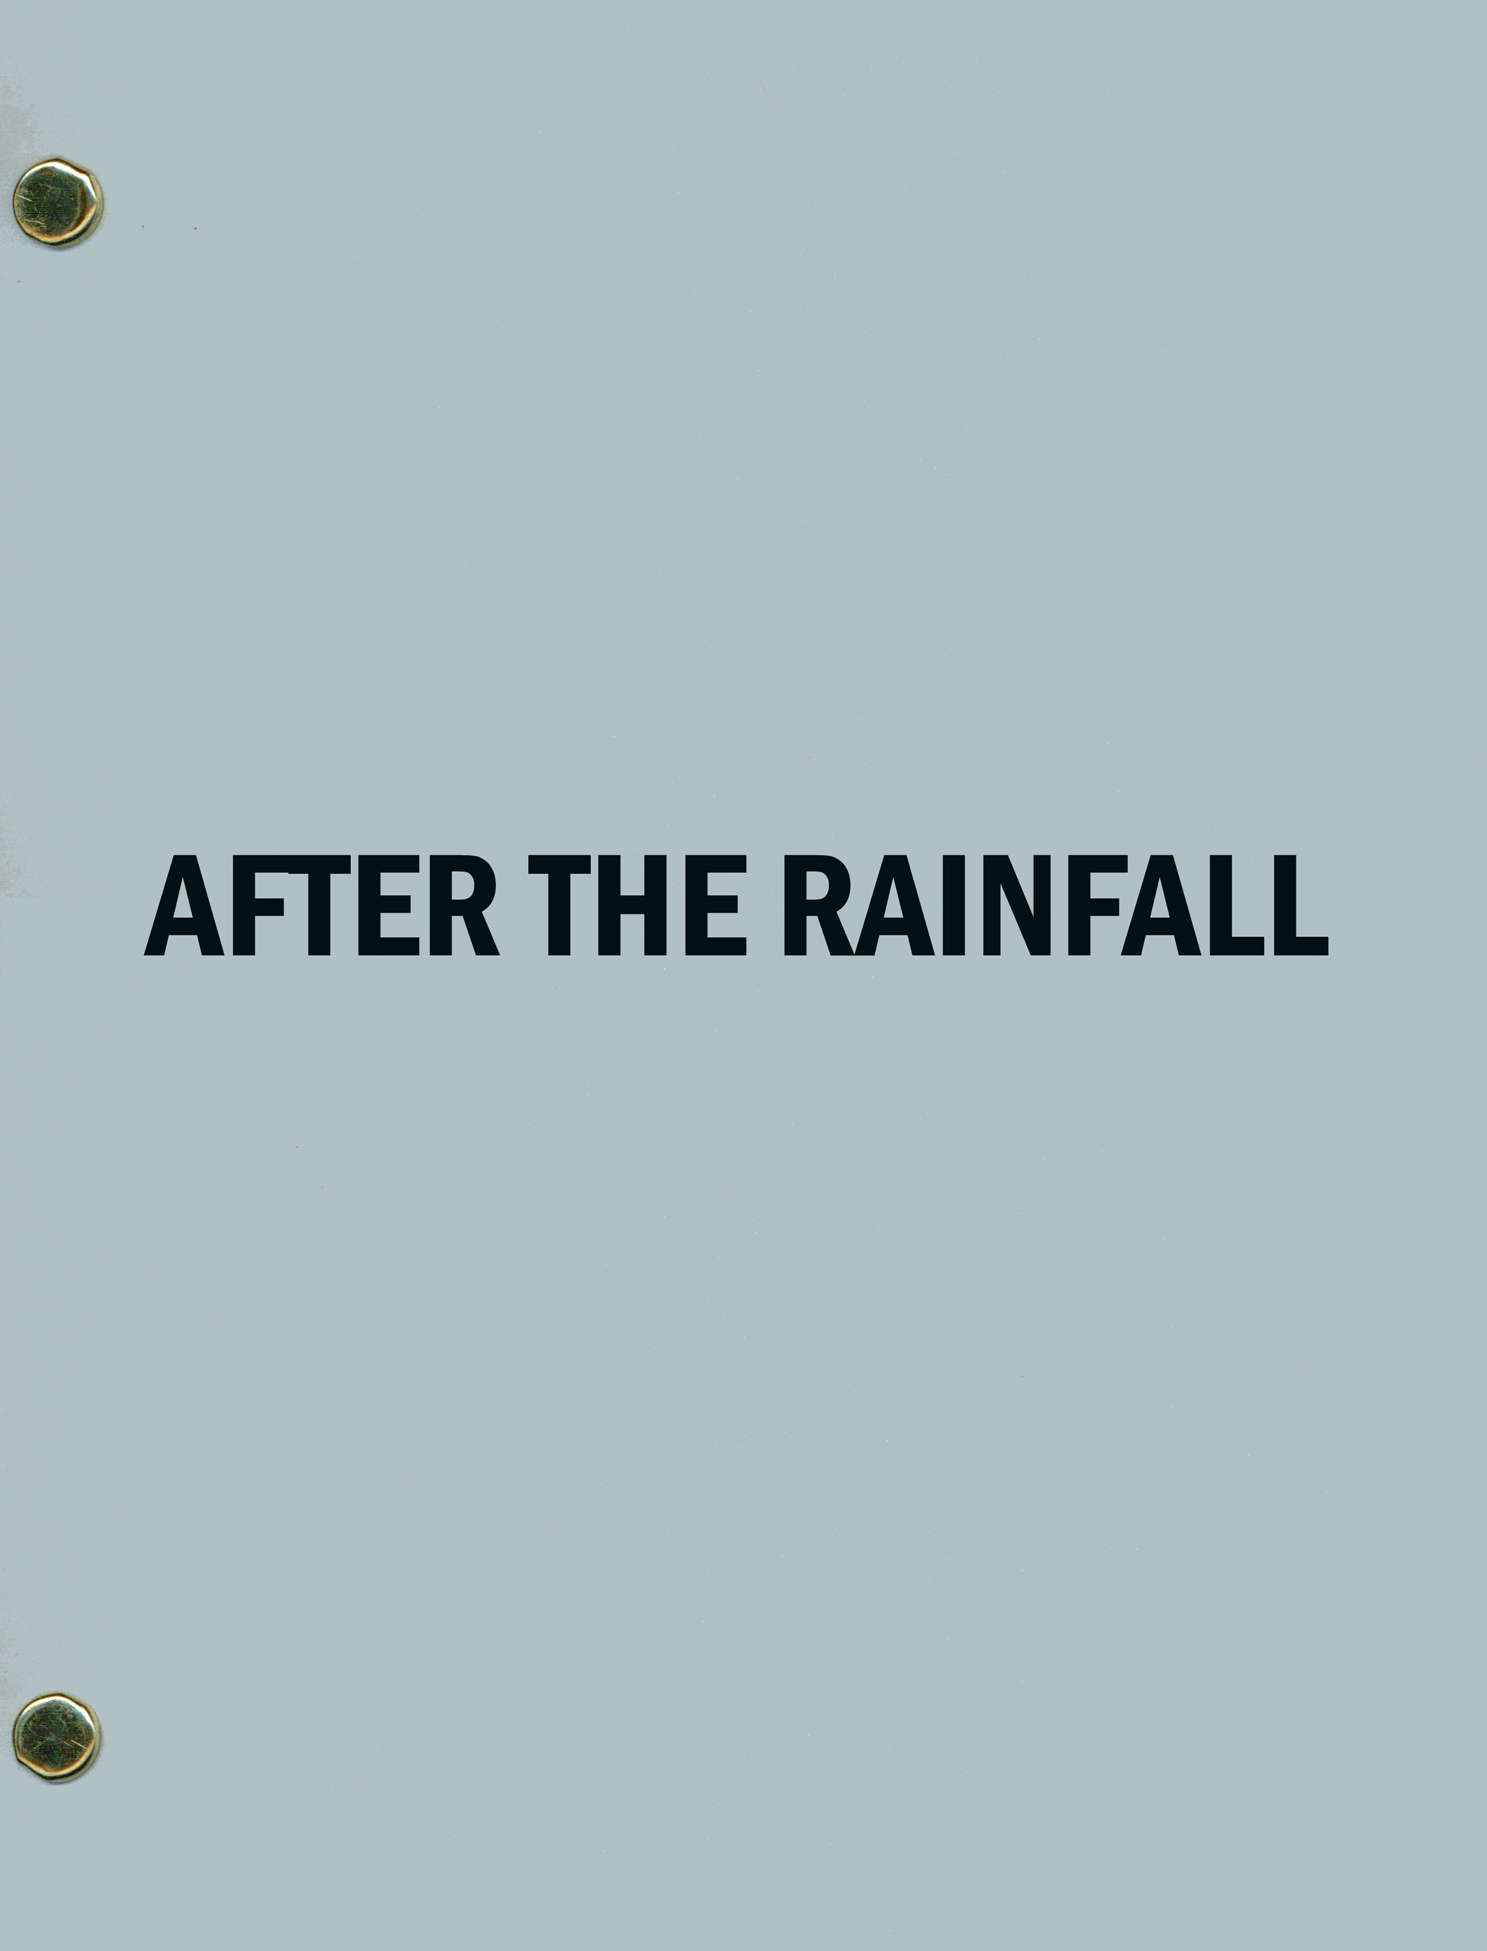 AFTER THE RAINFALL - contemporary thriller about young couple's survival in ruthless, highly challenging environment.